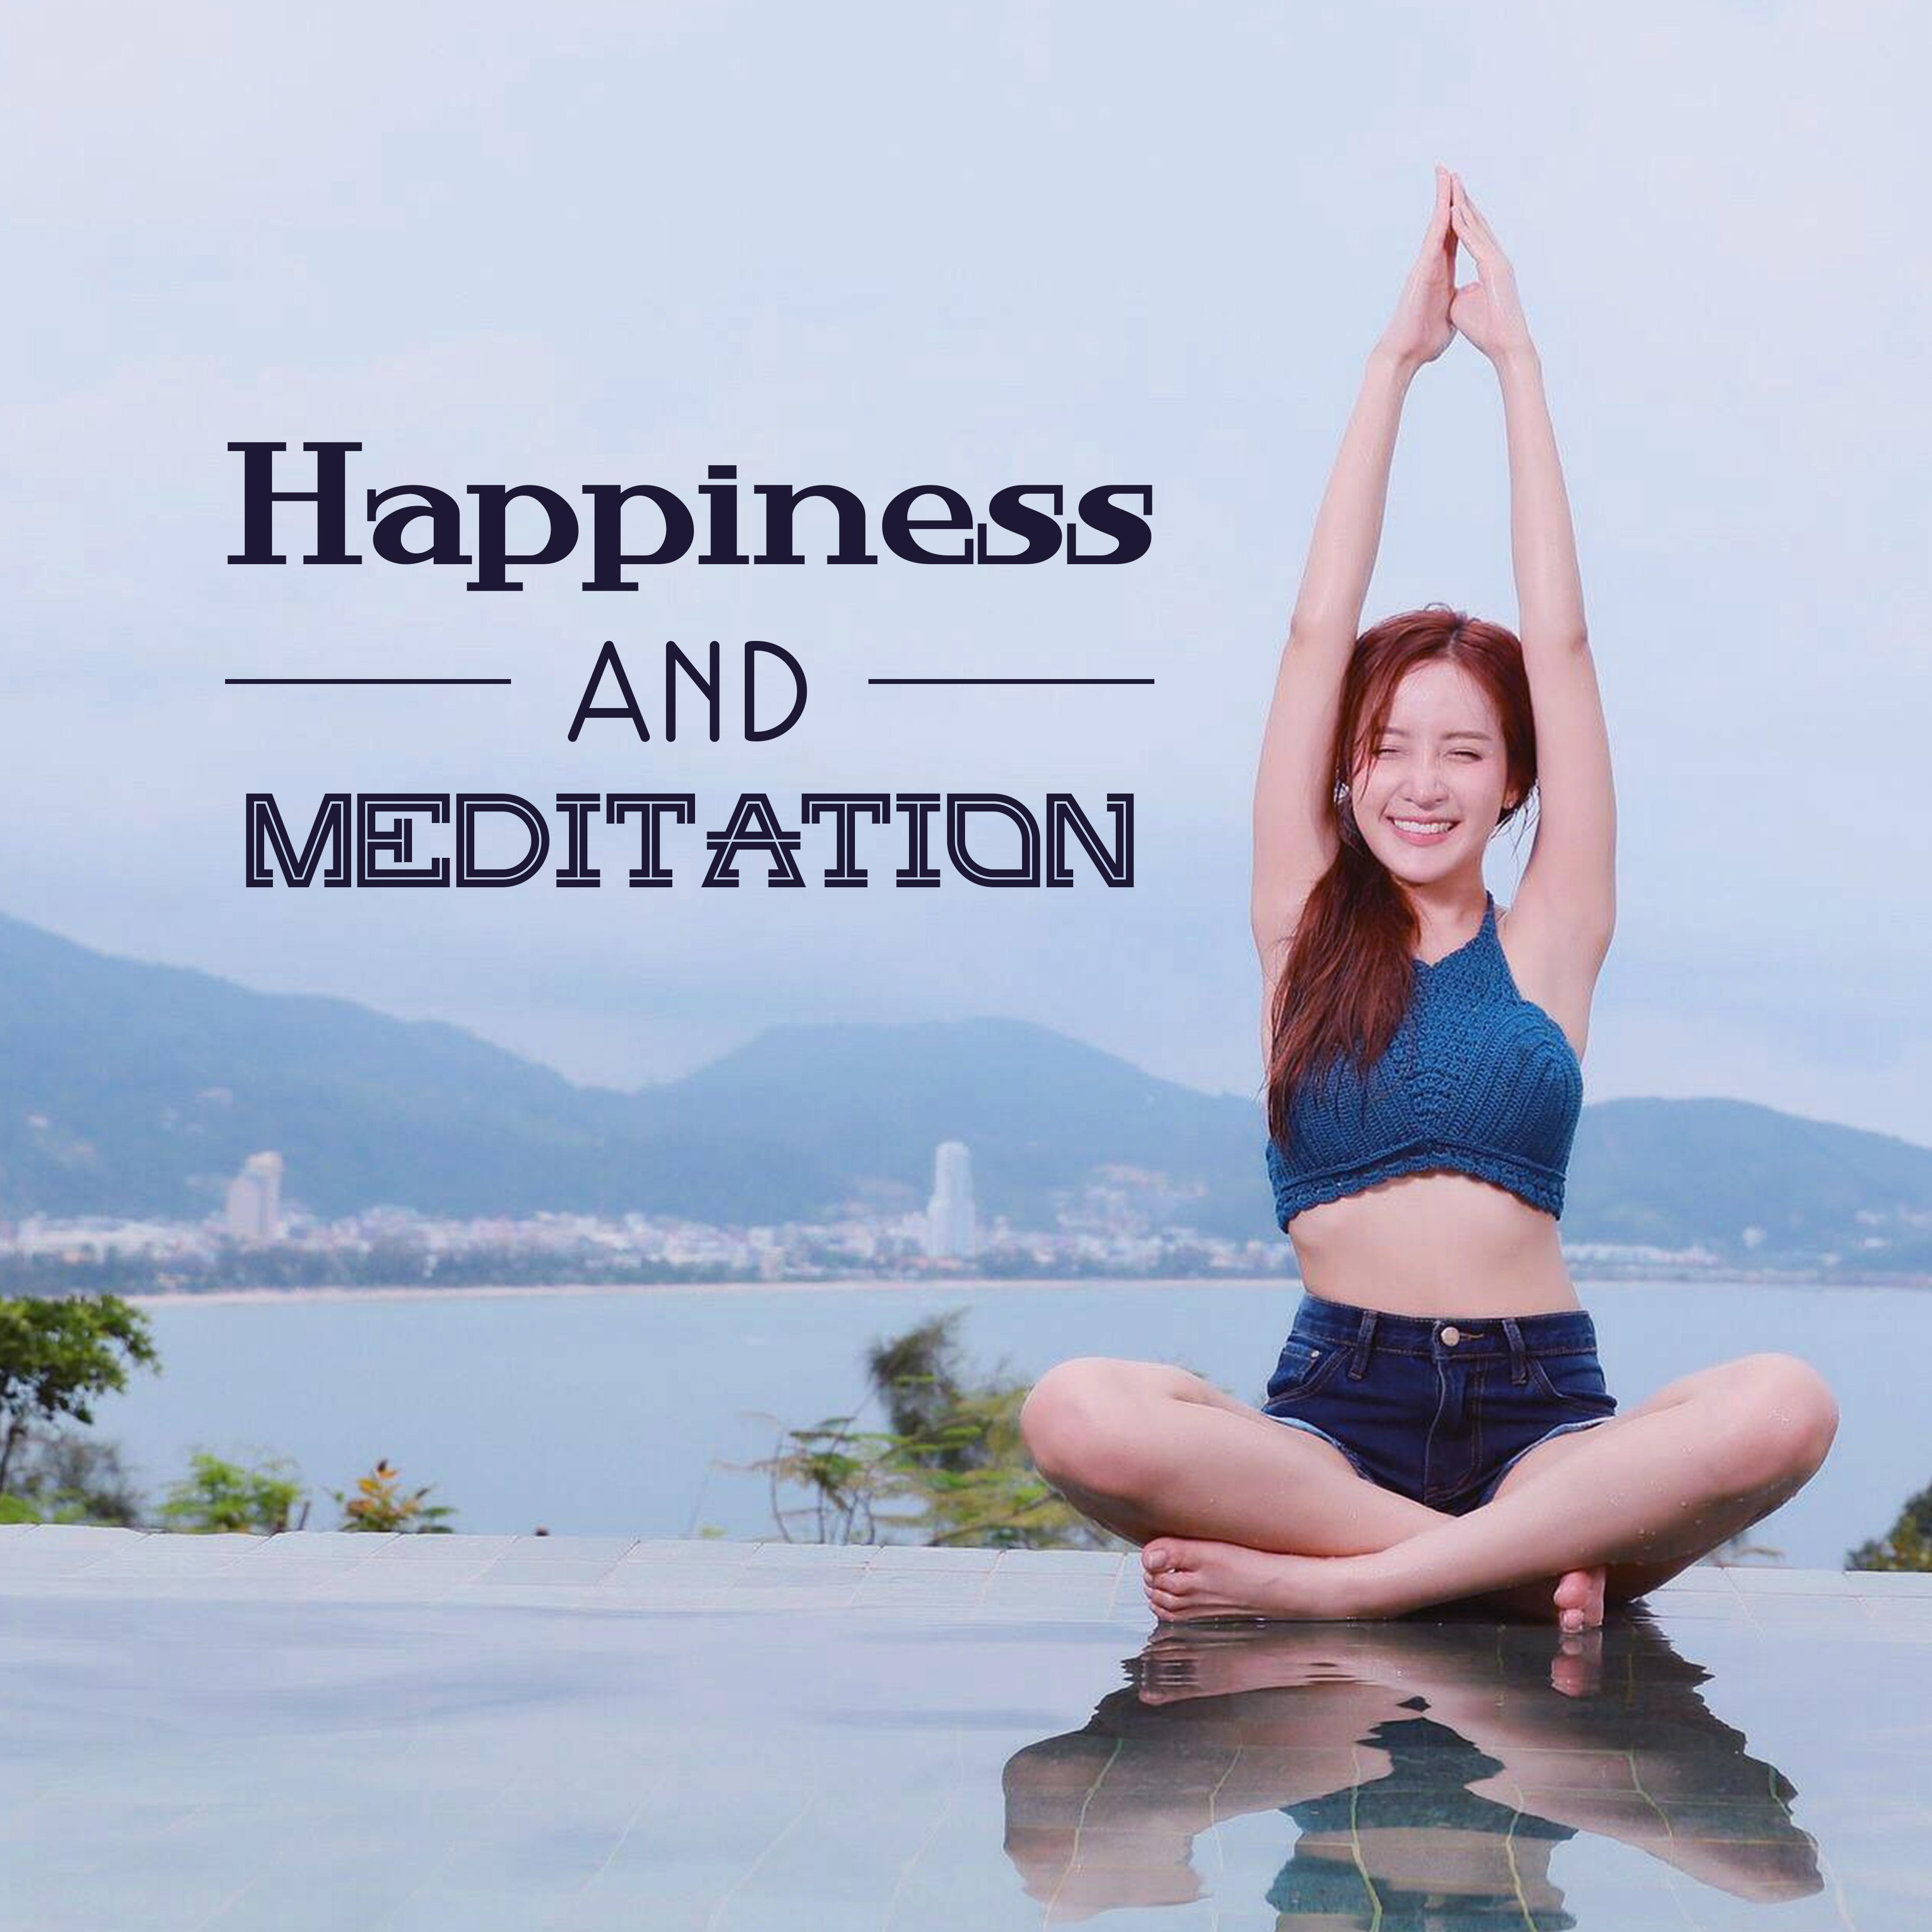 Happiness and Meditation – Yoga Music for Daily Meditation, Healing Nature Sounds and Tibetan Spirit, Zen Power